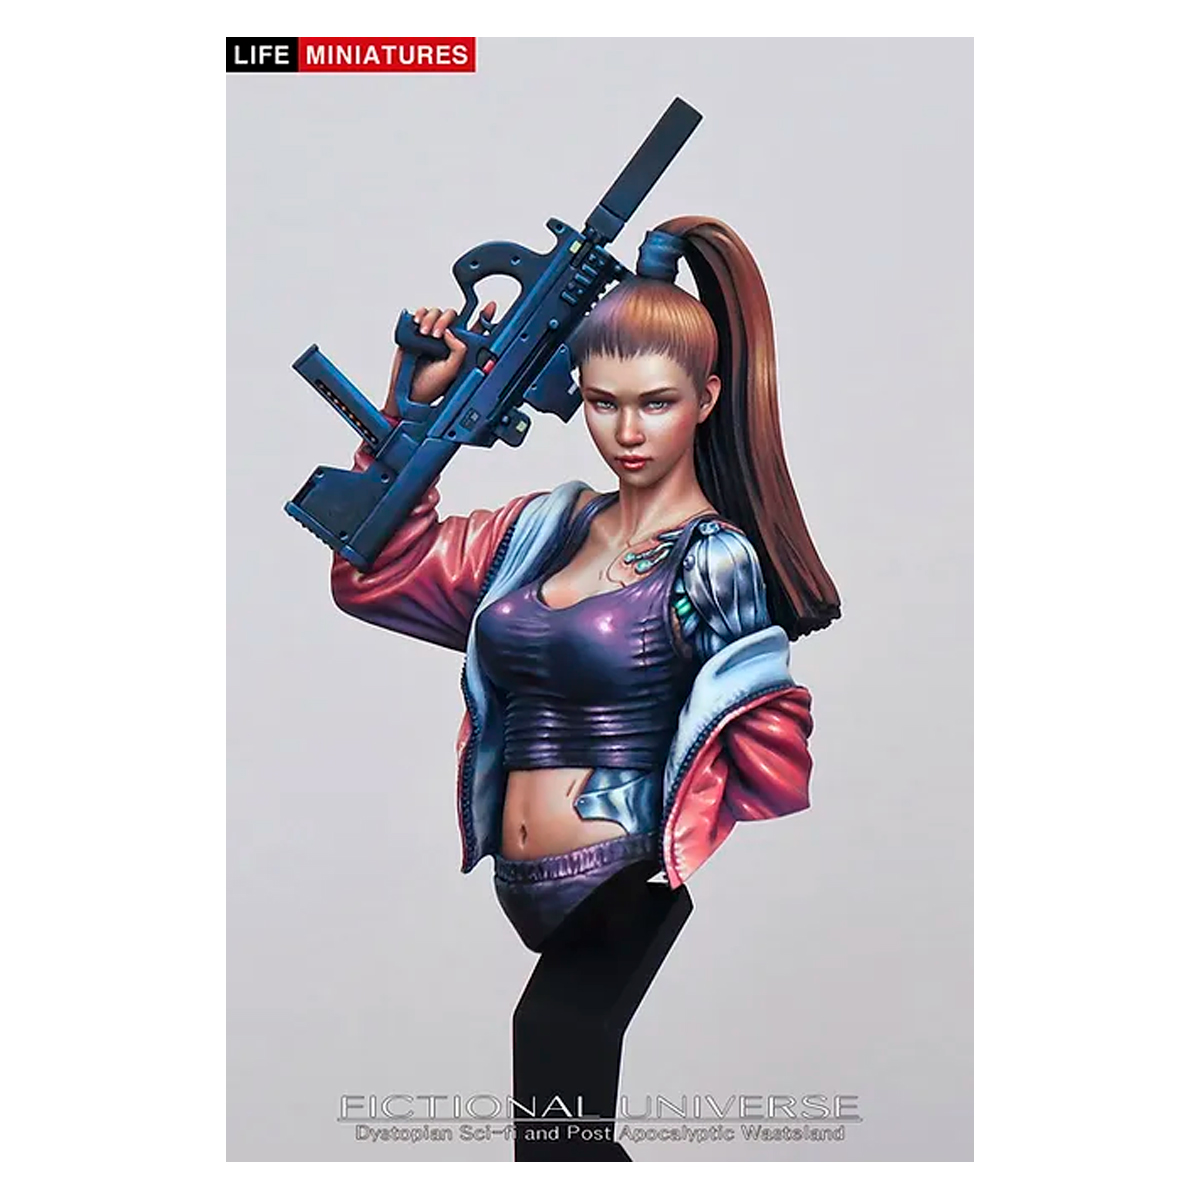 Life Miniatures – BAD BLOOD 2 (bust version) – 1/12 bust